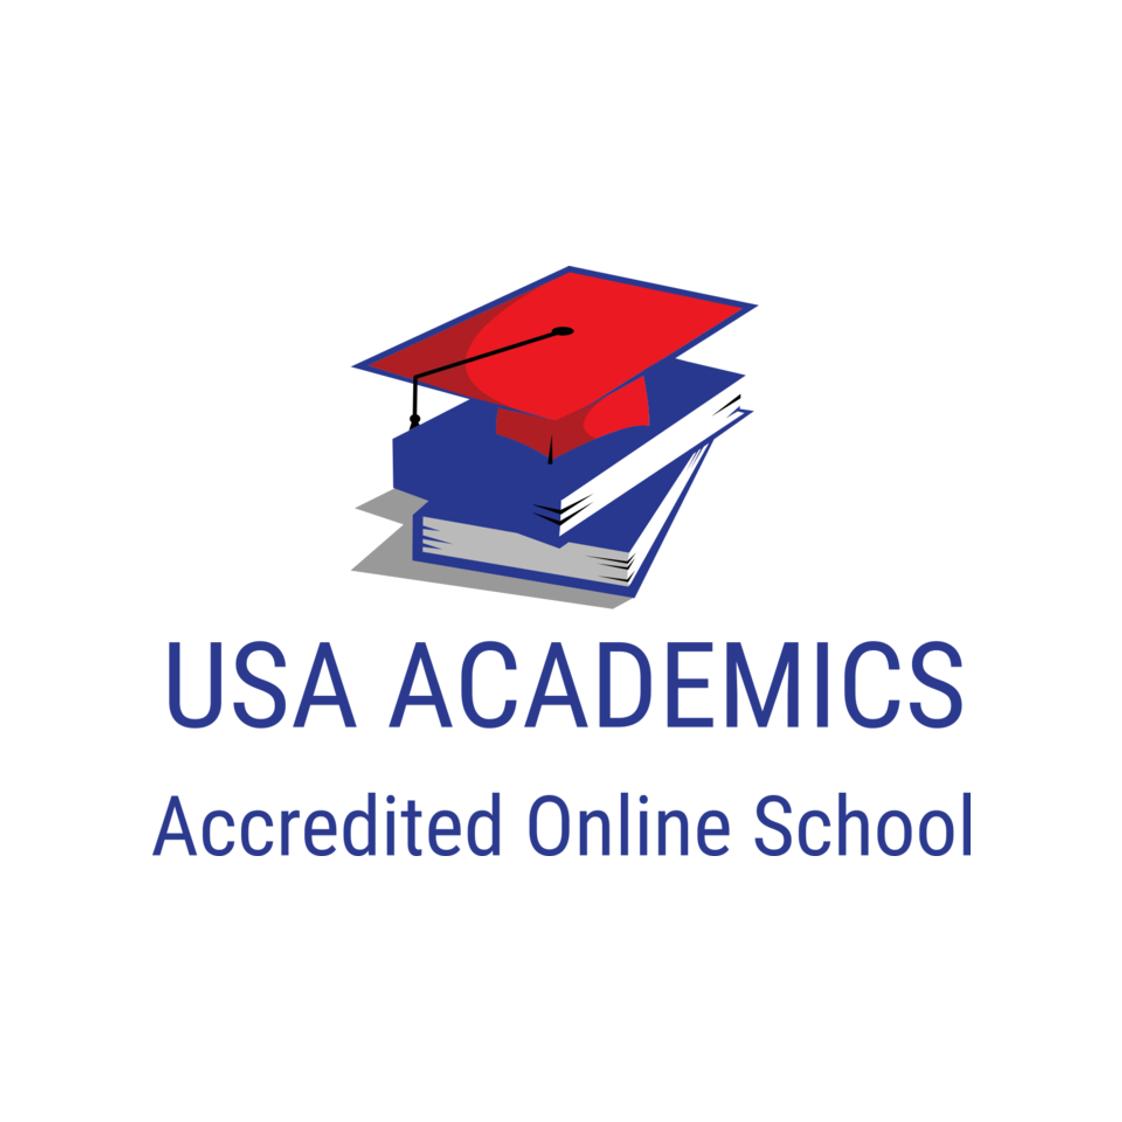 USA Academics Photo #1 - Affordable and Accredited Online School Grade 6-12. Among its extensive curriculums, USA Academics offers online Honor classes, AP classes, NCAA classes, Summer classes, Dual Diplomas, Dual Enrollment. Students and parents can choose between a Christian-based curriculum or a traditional one. Both offer the same national and state standards.